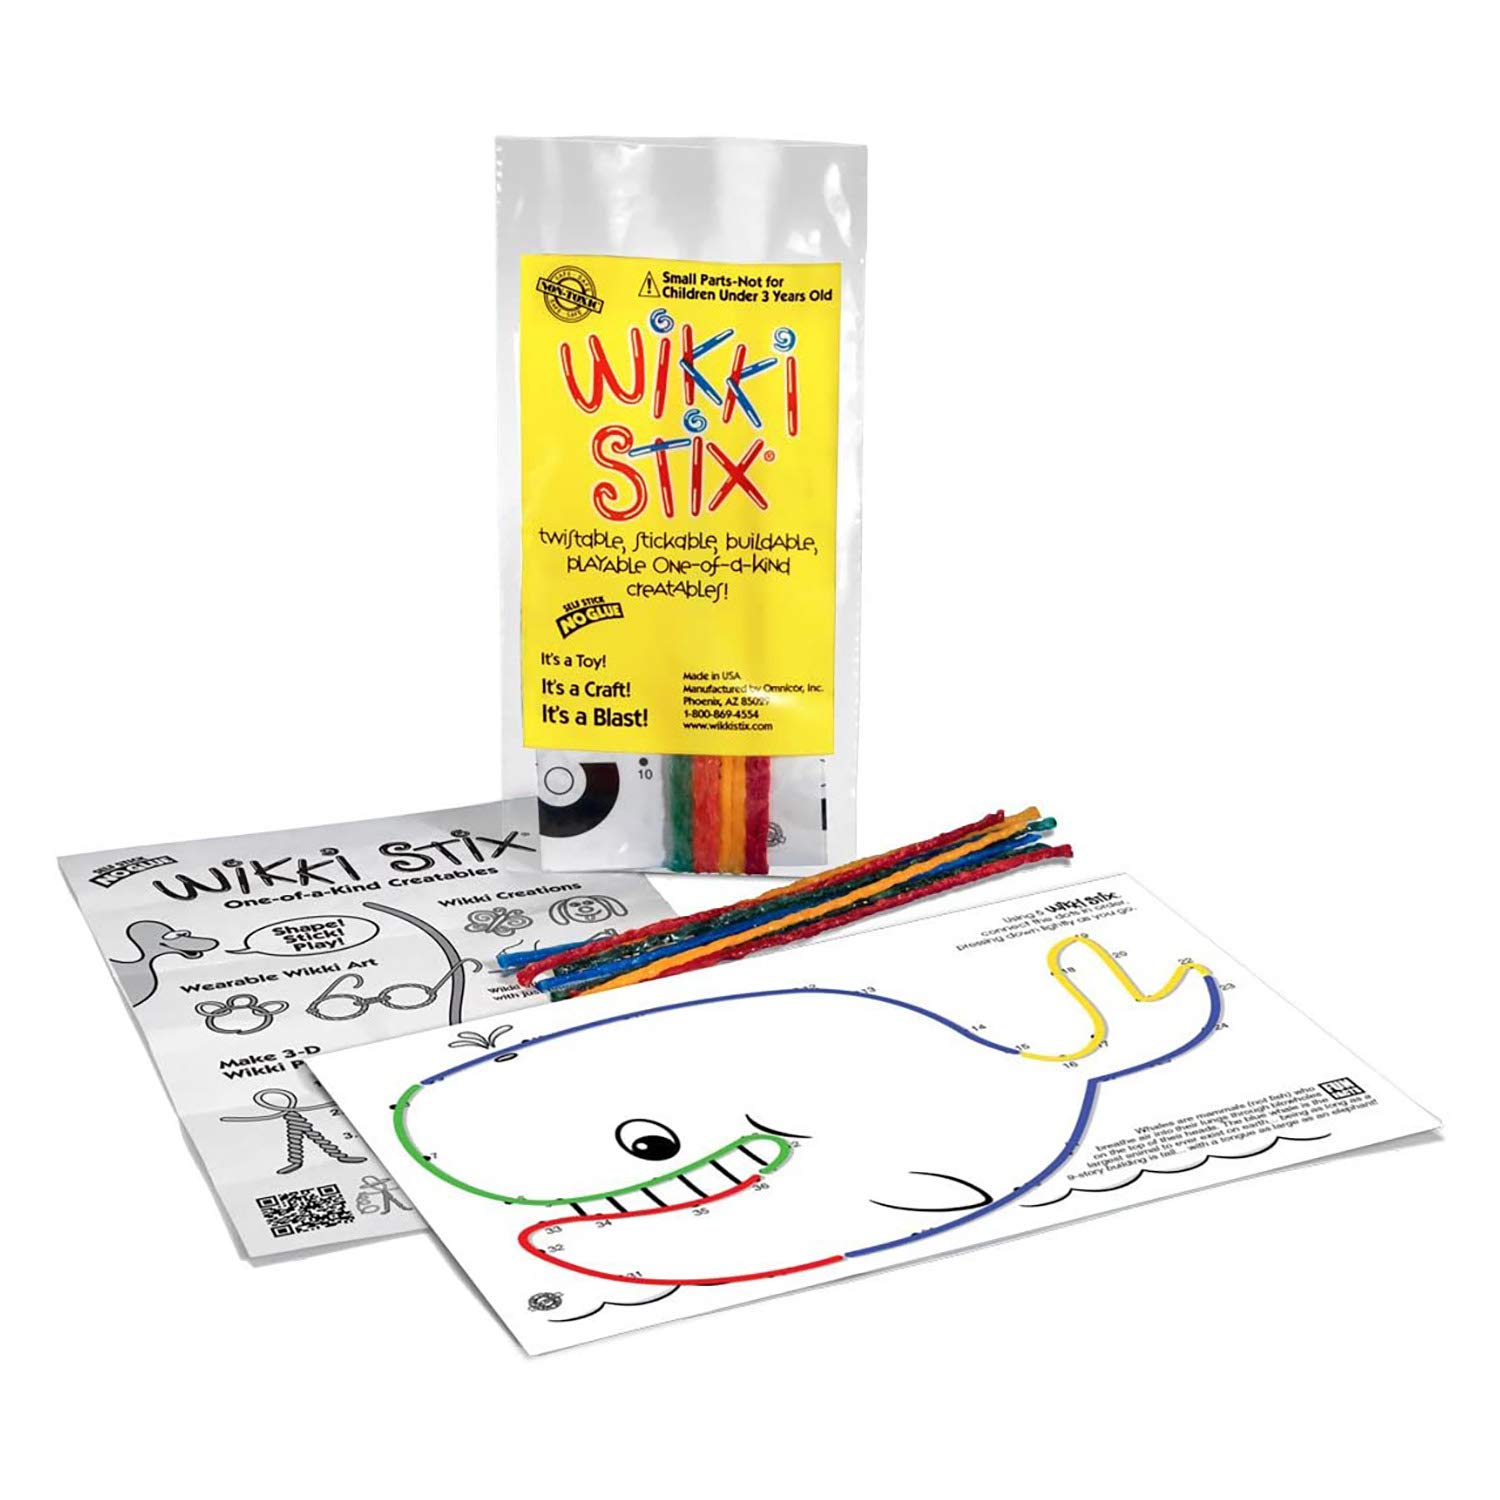 WikkiStix Sea Life Pak Features 12 Sea Creatures with Hands-on Activity and Fun Fact on Each, Made in The USA!